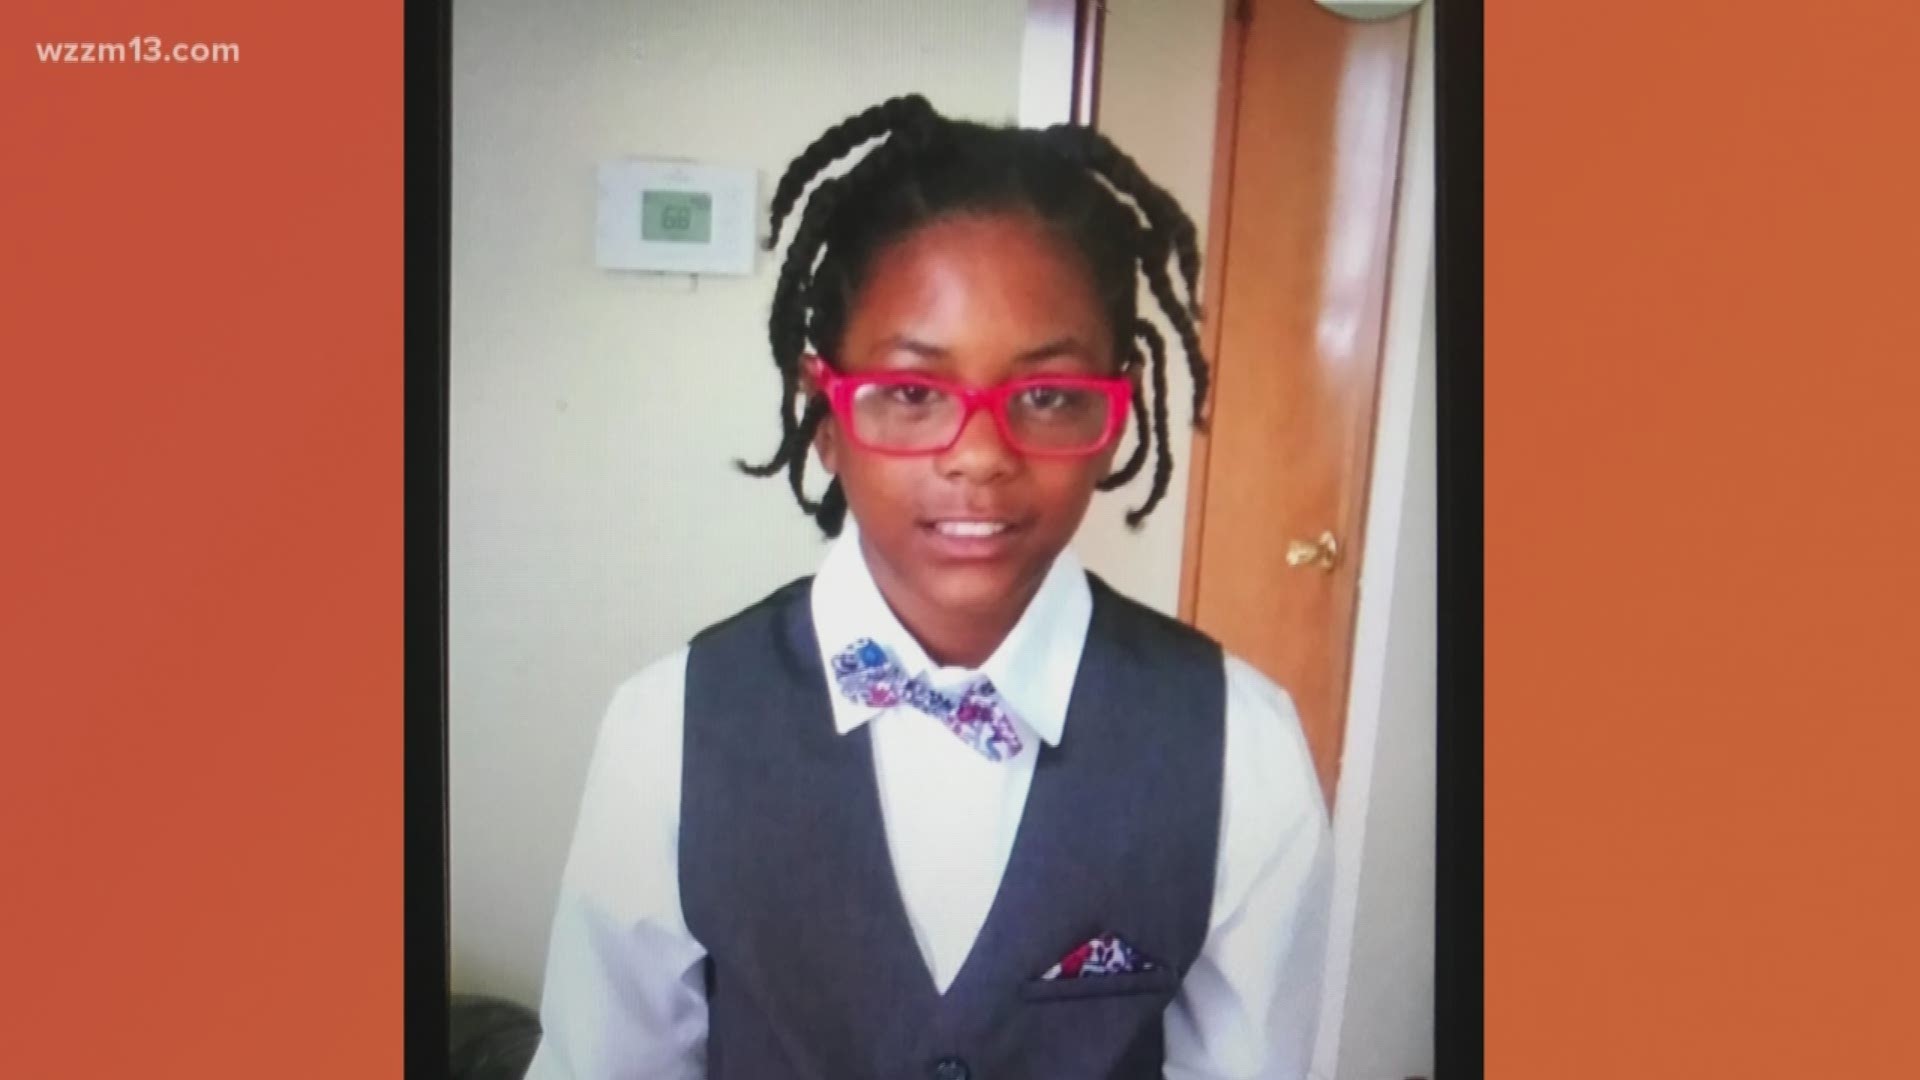 Jaron Daprince Shepard, a 9-year-old boy from Wyoming, was last seen wearing camouflage pants, a green sweatshirt, and red glasses. He has ponytails and braids in his hair.